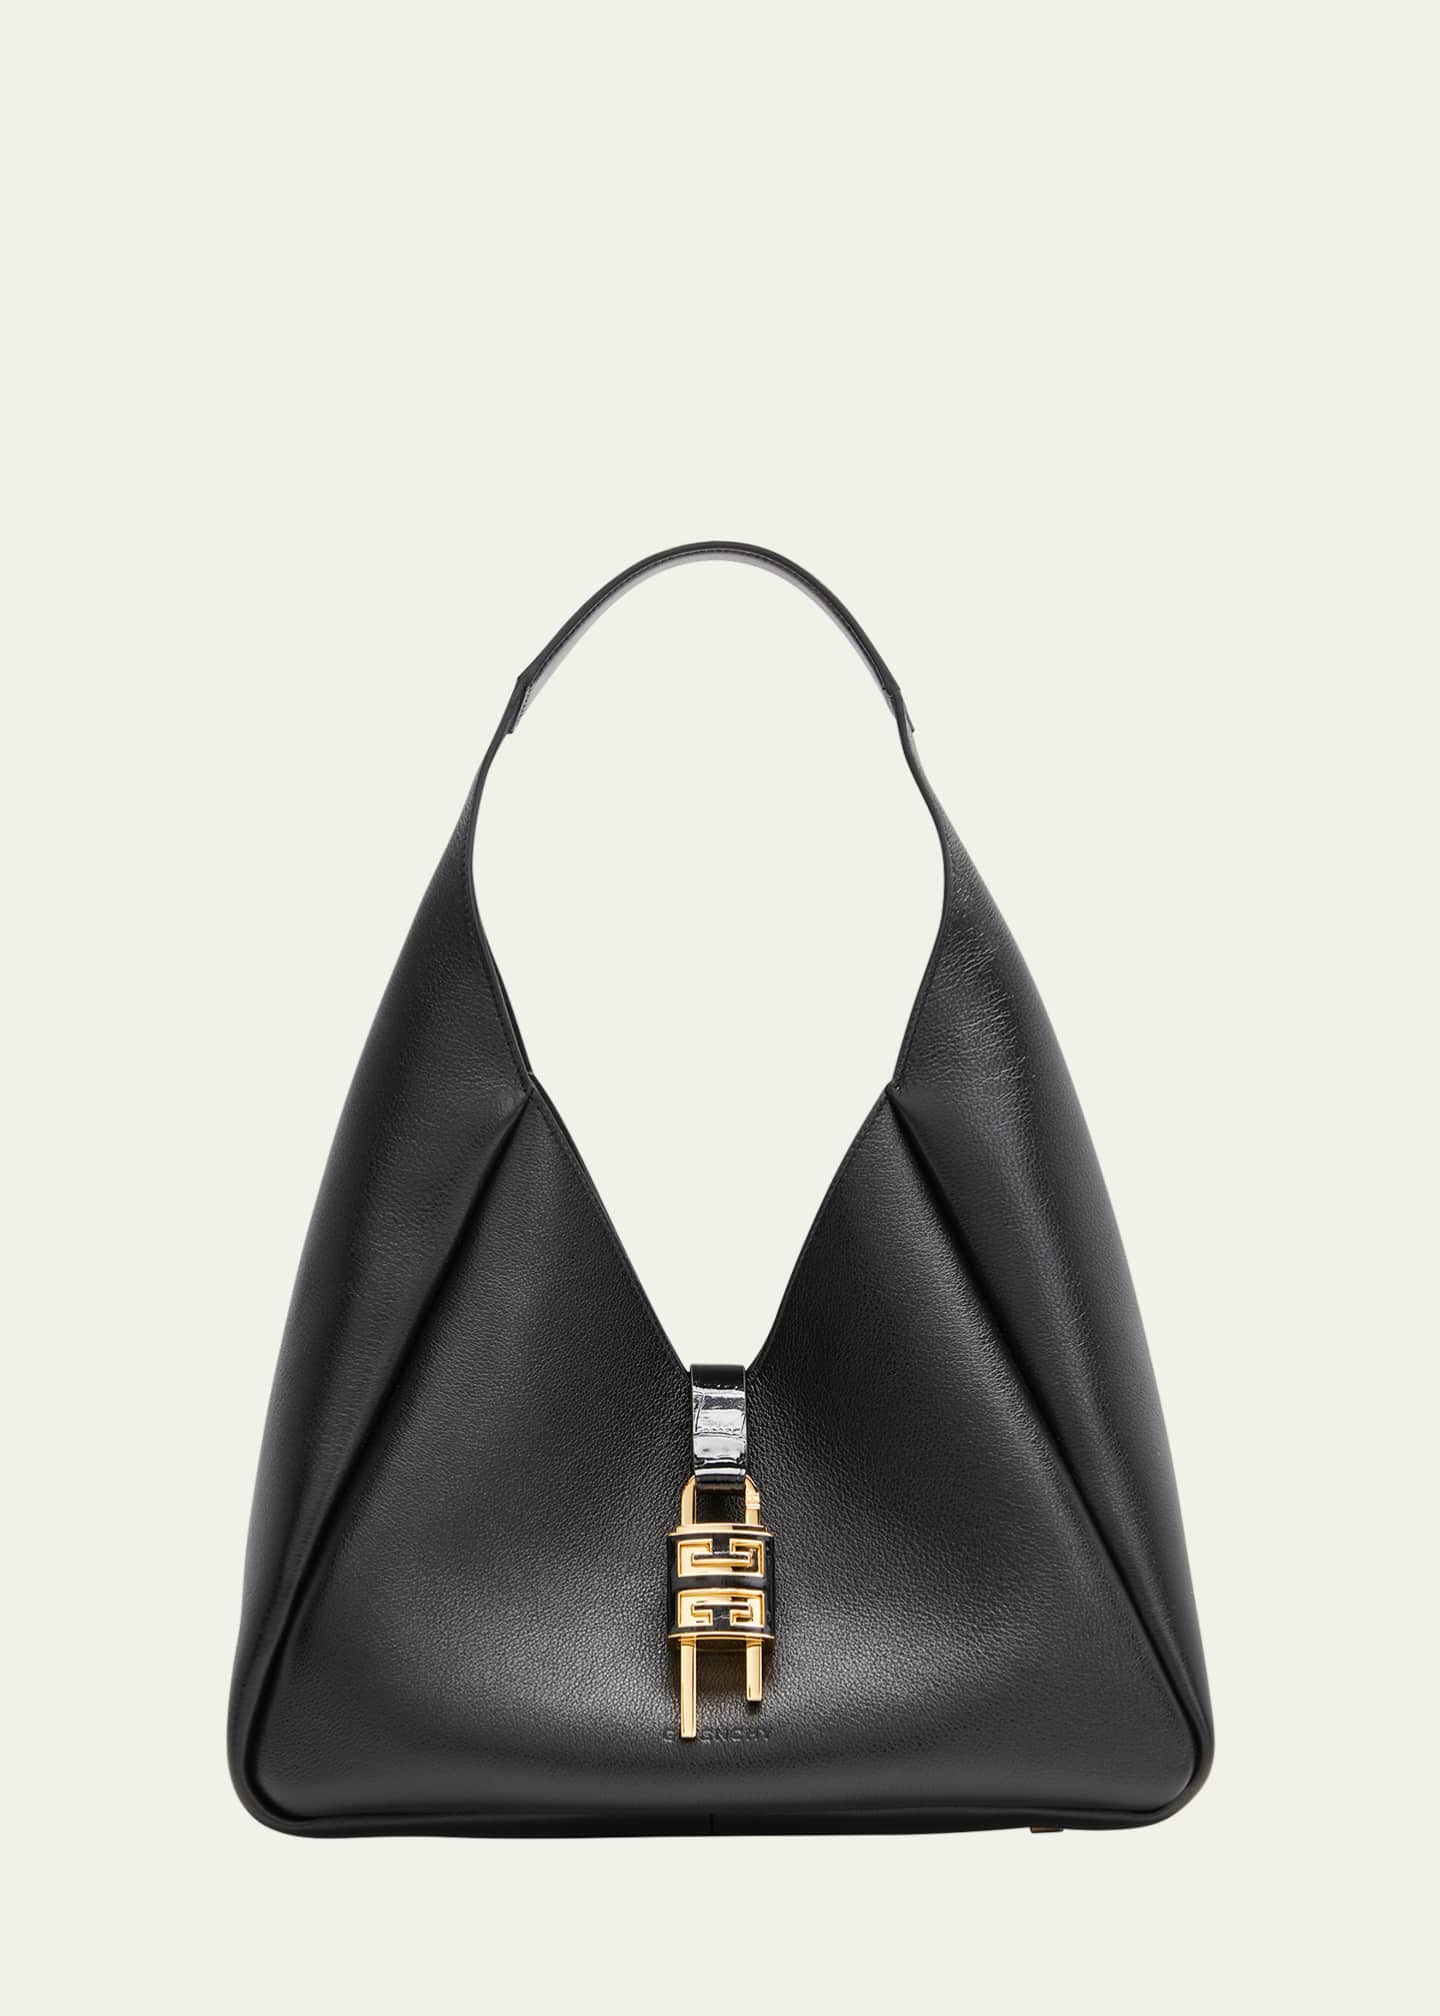 What's In My Bag? / What's In My Purse? GIVENCHY ANTIGONA SHOPPING